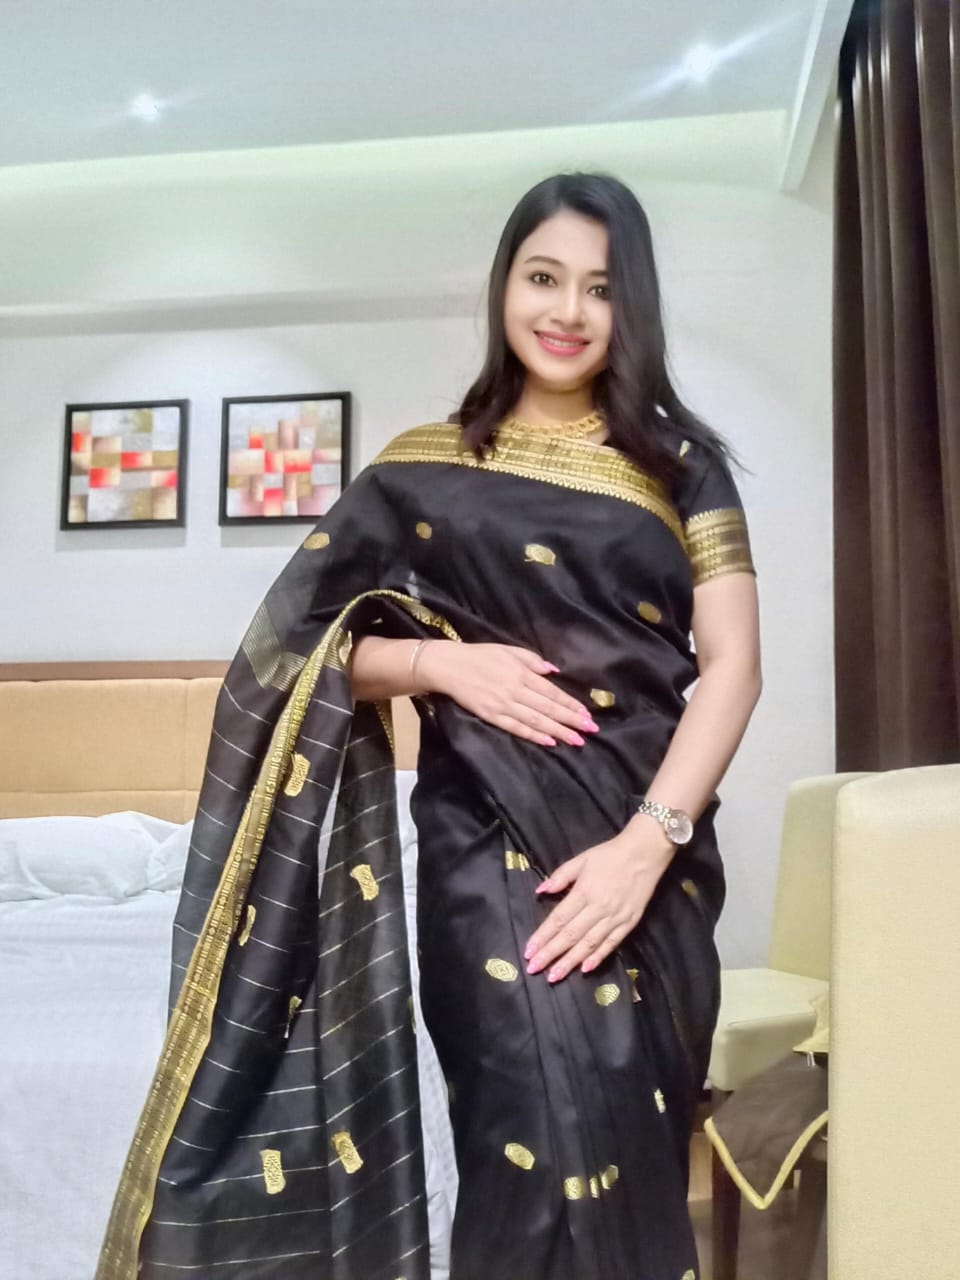 VIP Escorts Services Andheri: Luxury and Sophistication